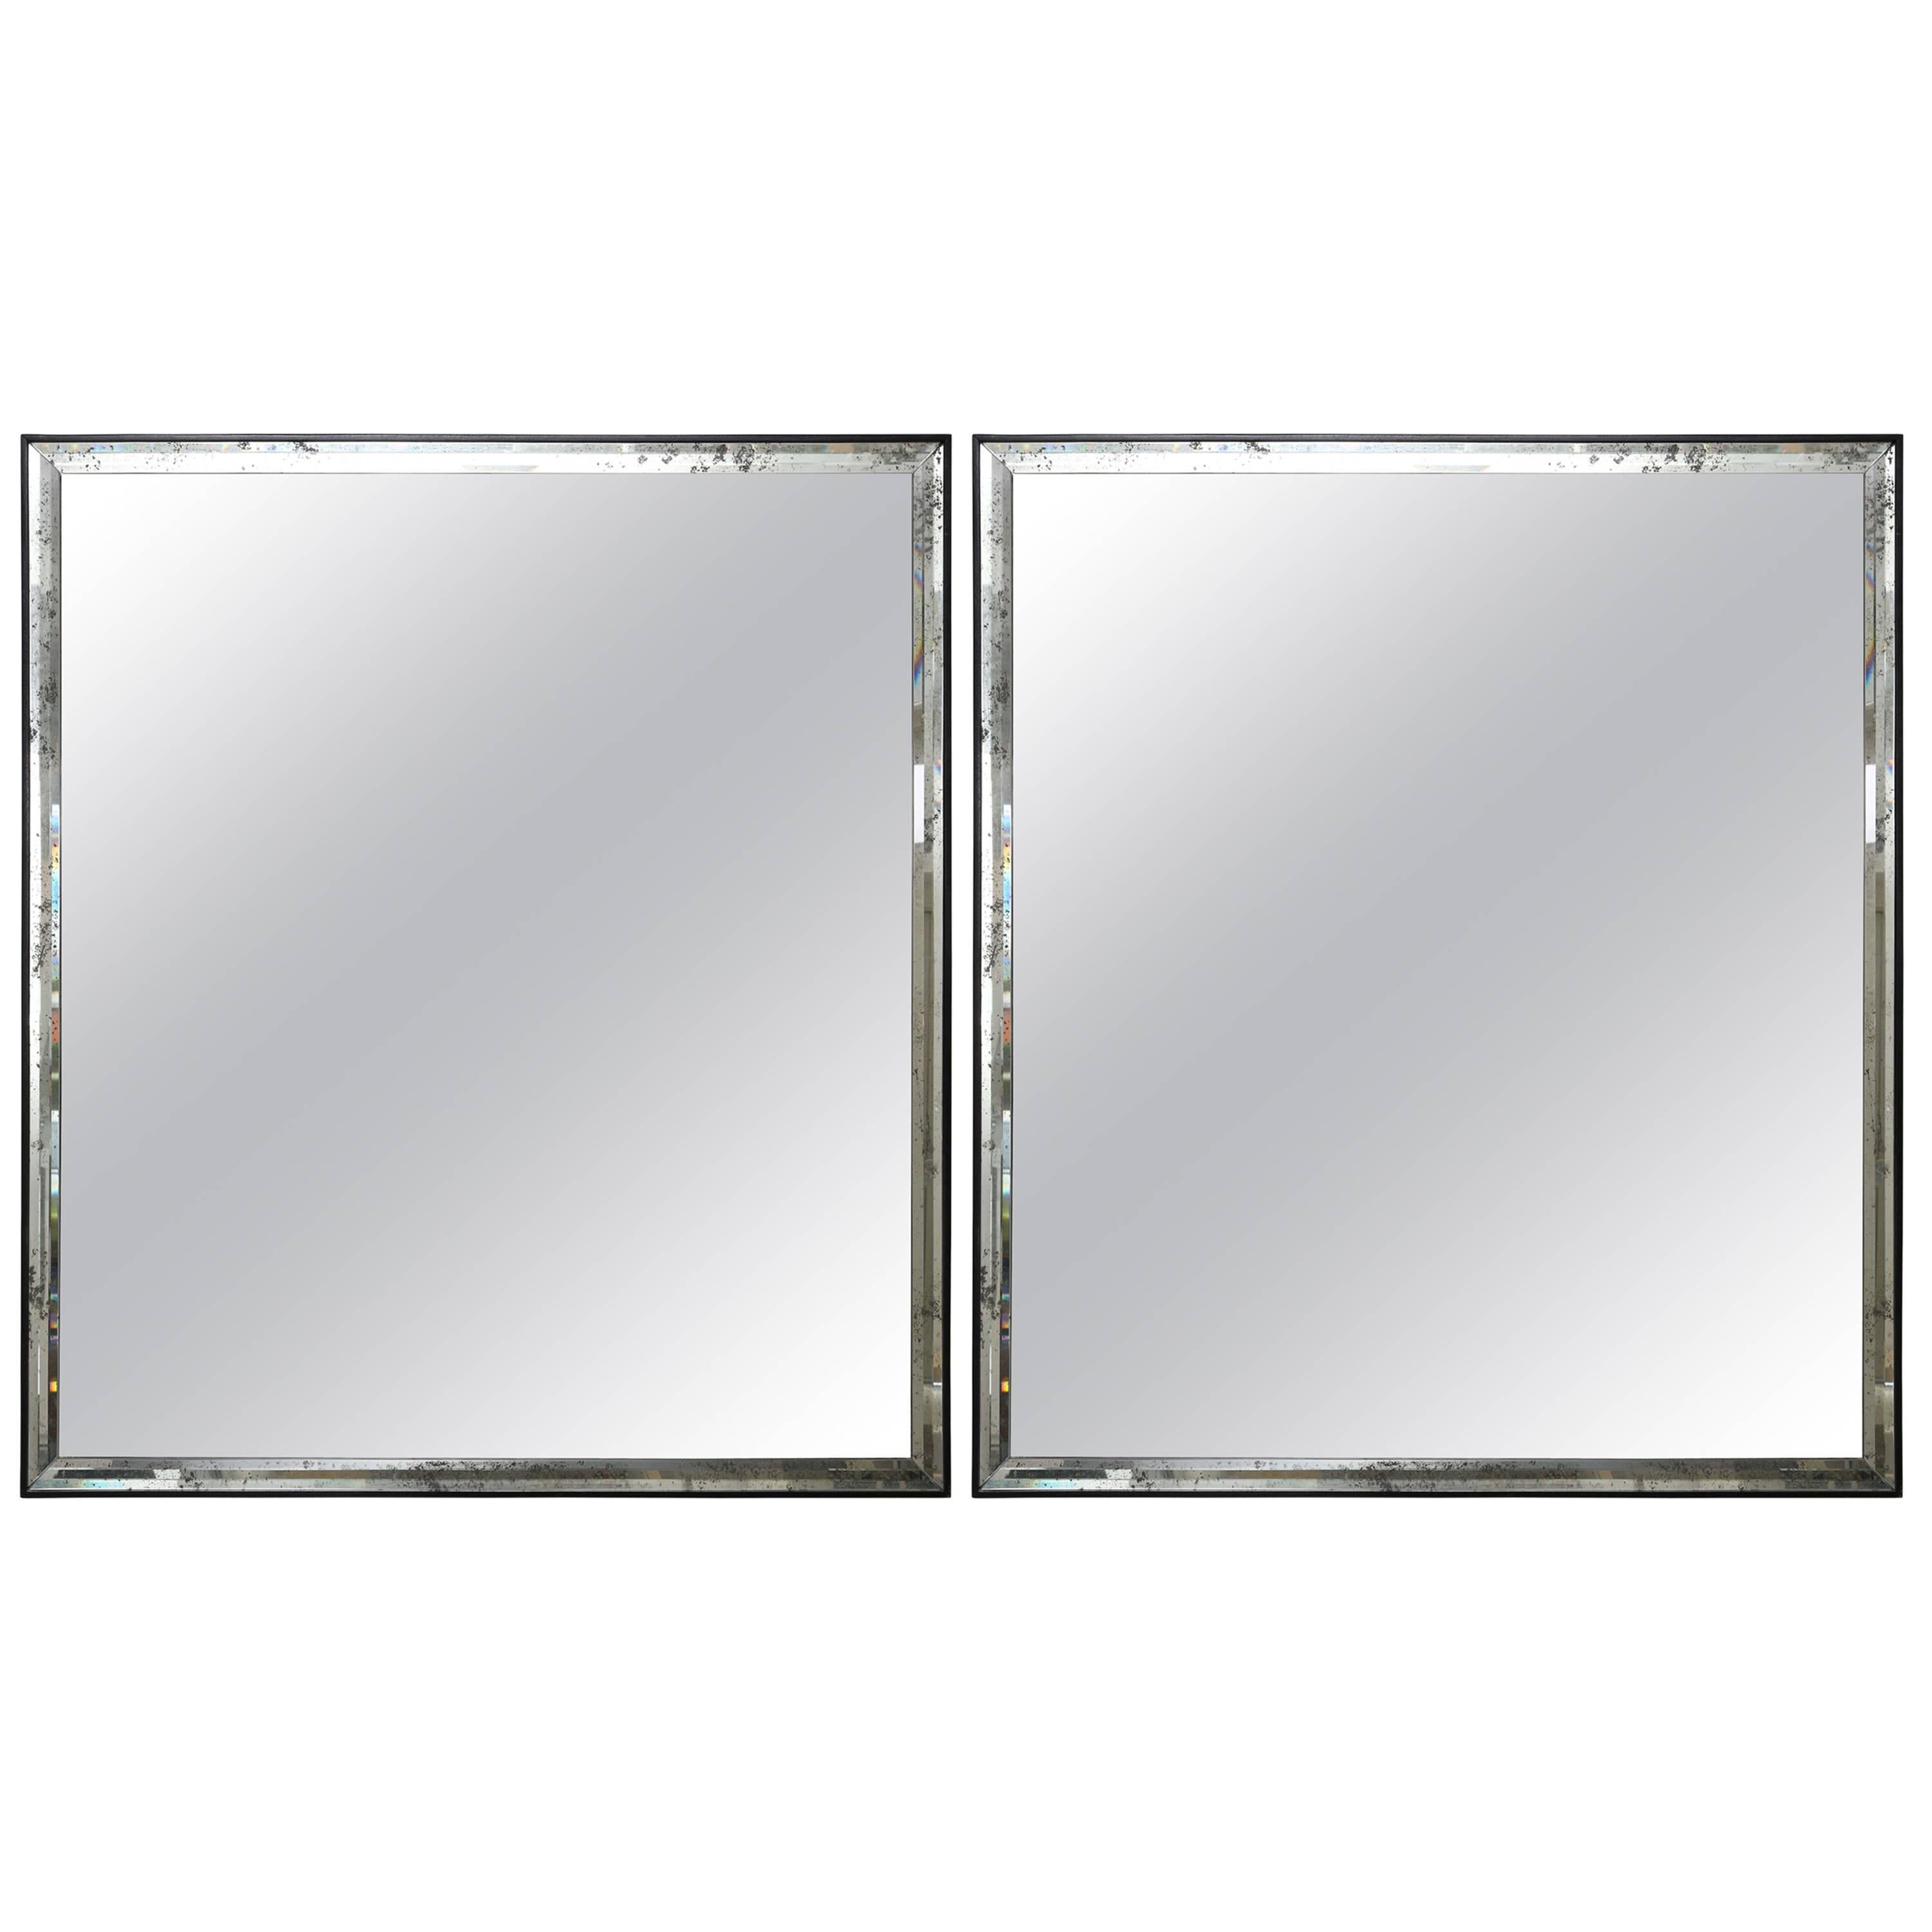 Pair of Mirrors with Etched Star Motif